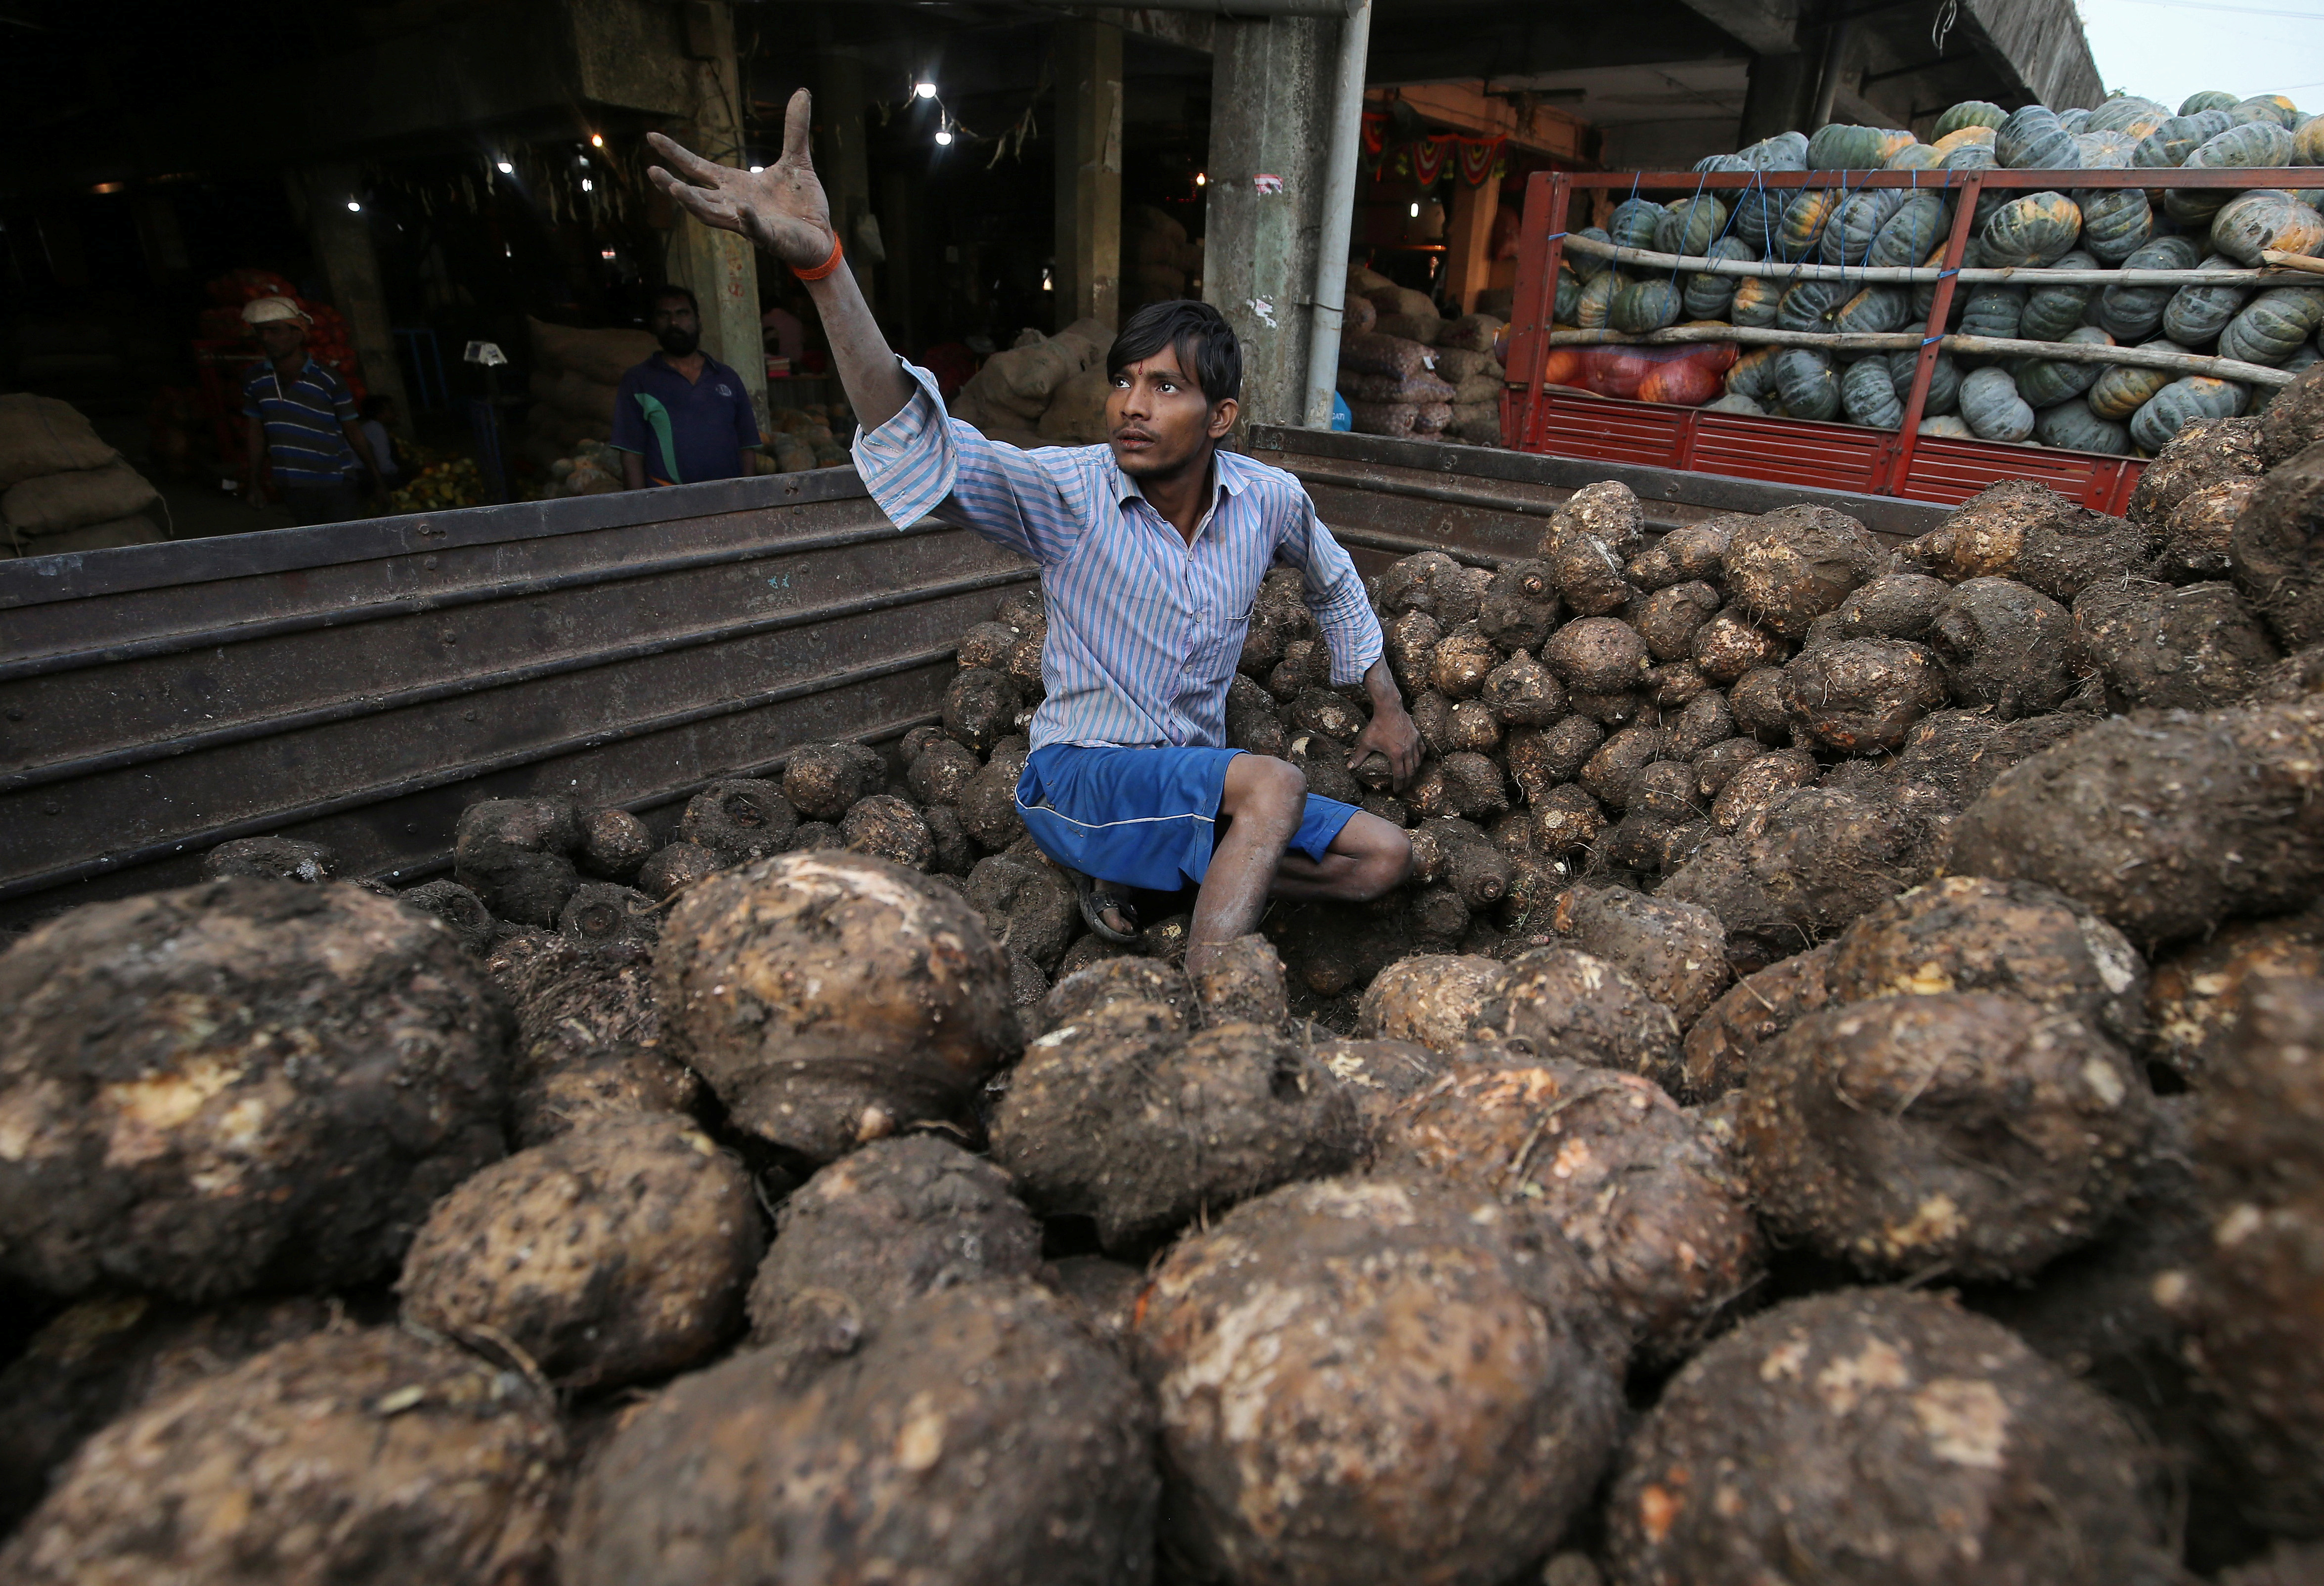 A man sorts yams in a supply truck at a wholesale market in Mumbai